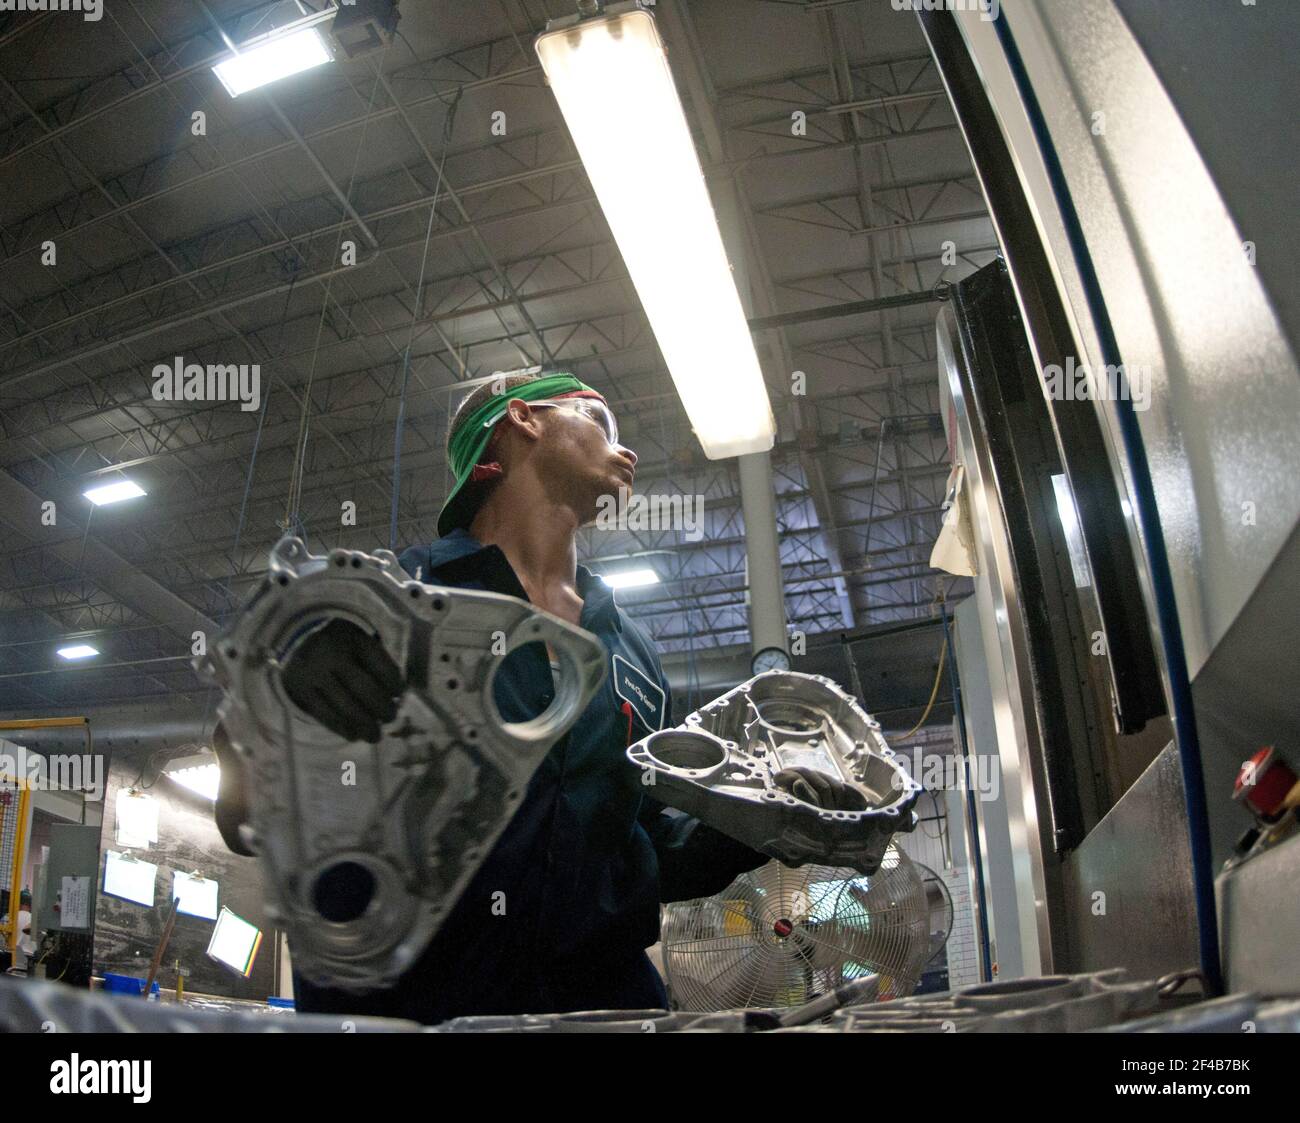 Computer Numerical Control (CNC) machine operator Blake Veeneman makes a process inspection after a casting is machined at Port City Group’s Port City Castings Corporation manufactures high-pressure aluminum die-castings, mostly for the automotive industry, in Muskegon, MI, facility on Wednesday July 20, 2011.  Port City Group boosted its employment by 12 percent over last year thanks to two Rural Business Guaranteed Loans totaling $9.6 million. In its 80,000 sq. ft. facility, machines that range from 800 – 1,600 tons, and cast A380 aluminum alloy products from melted ingots of aluminum, into Stock Photo